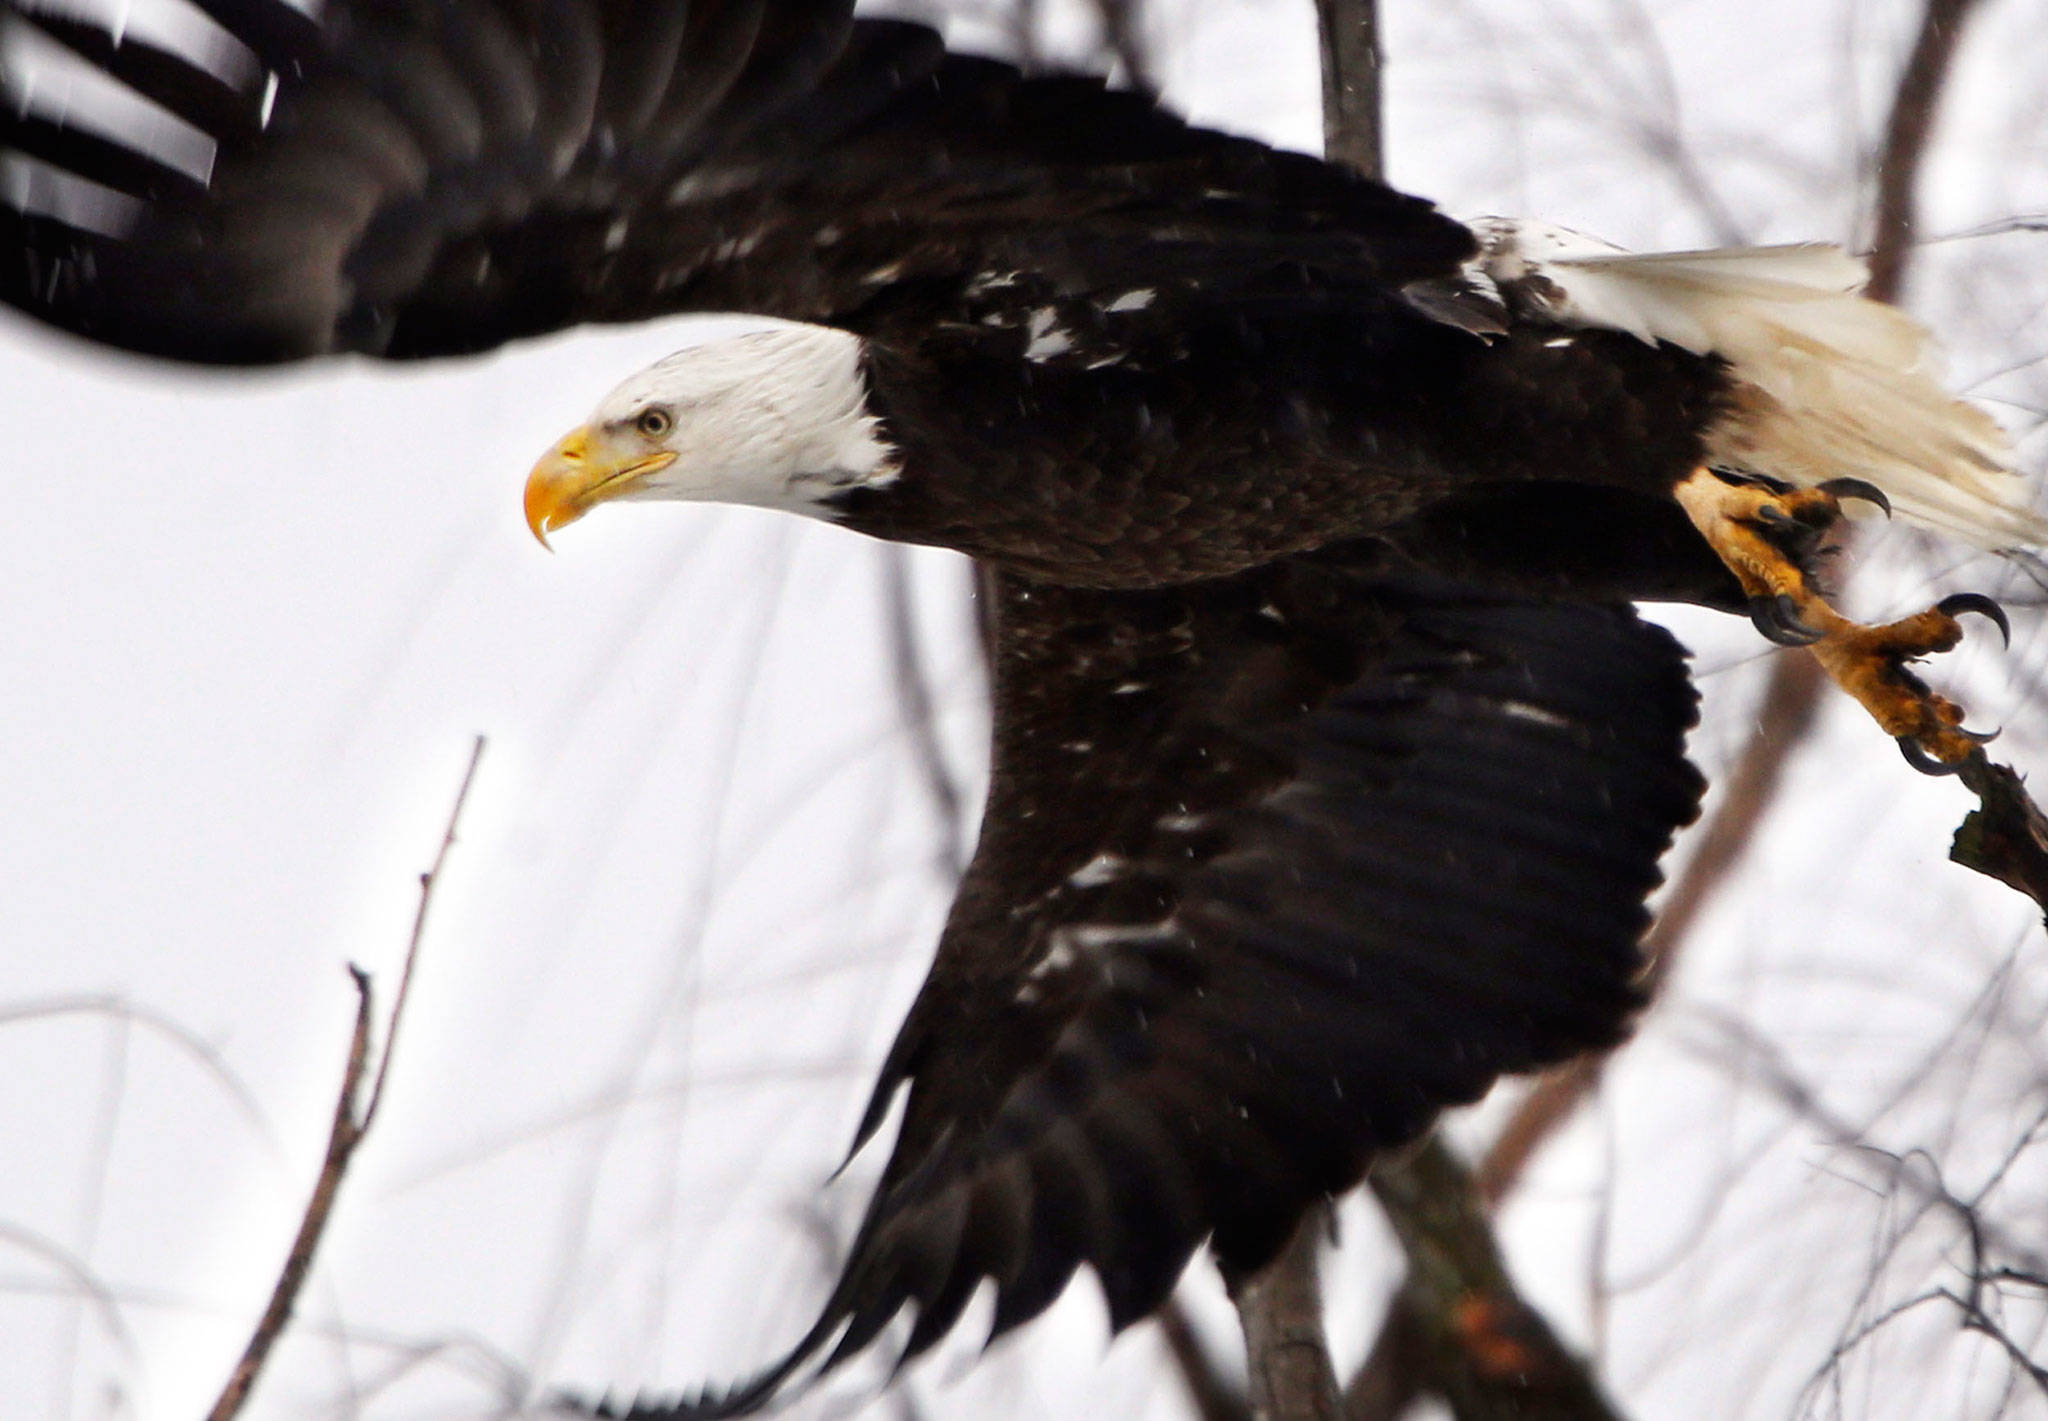 A bald eagle takes flight at the Museum of the Shenandoah Valley in Winchester, Virginia in February 2016. While once-endangered bald eagles are booming again in the U.S., the overall trajectory of endangered species and the federal act that protects them aren’t so clearcut. (Scott Mason / The Winchester Star / Associated Press file photo)